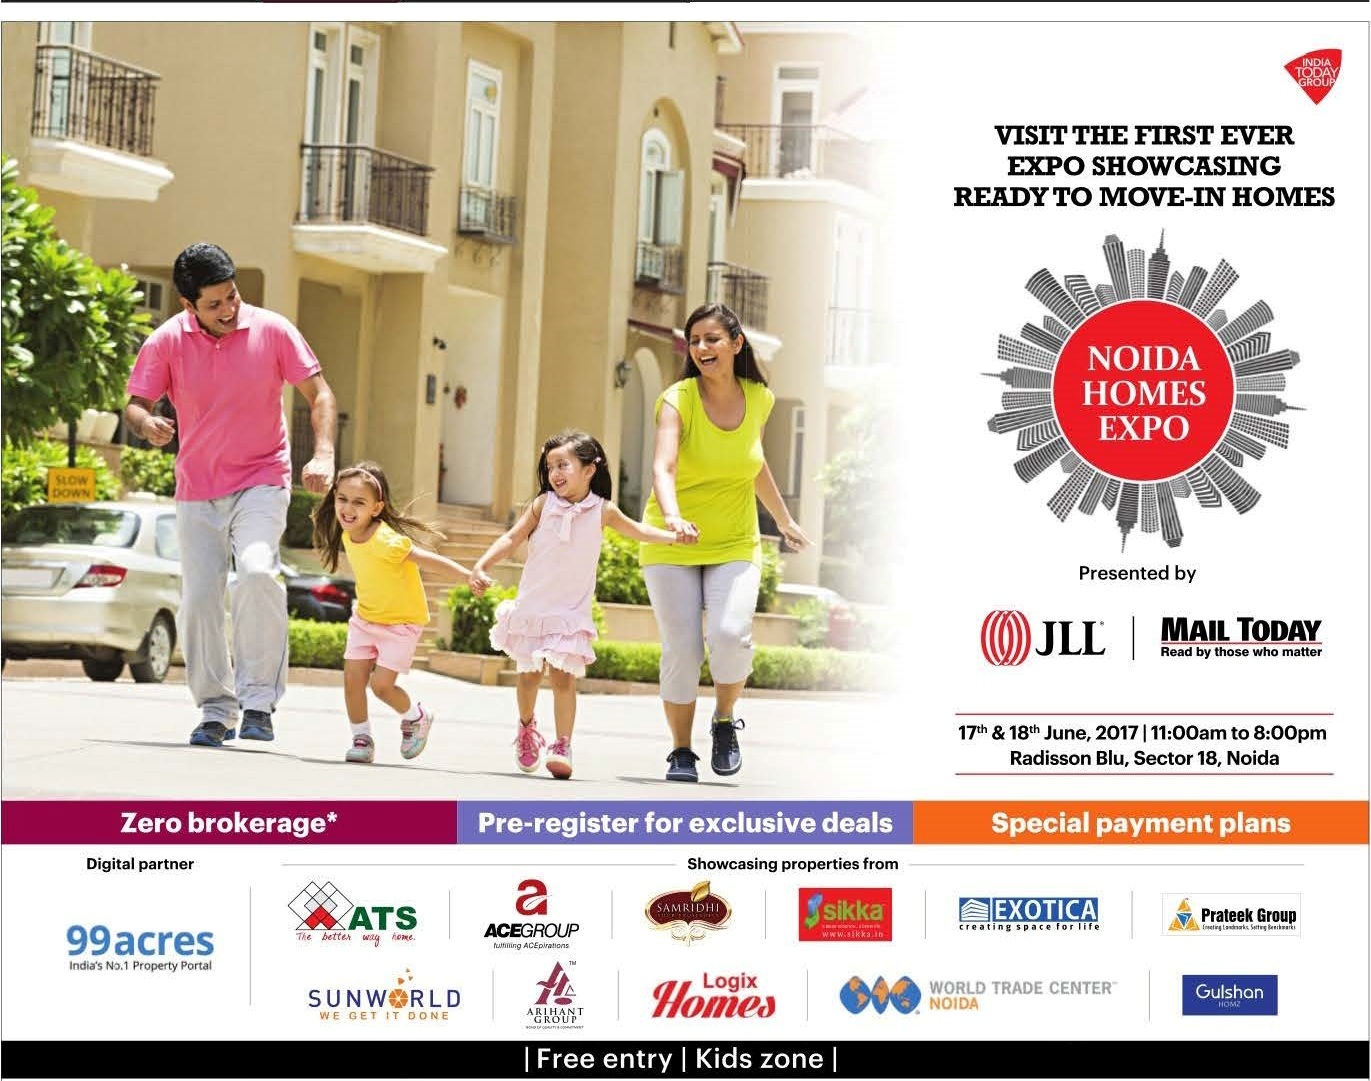 JLL and Mail Today presents First Ever Real Estate Expo showcasing Ready To Move In Homes in Noida